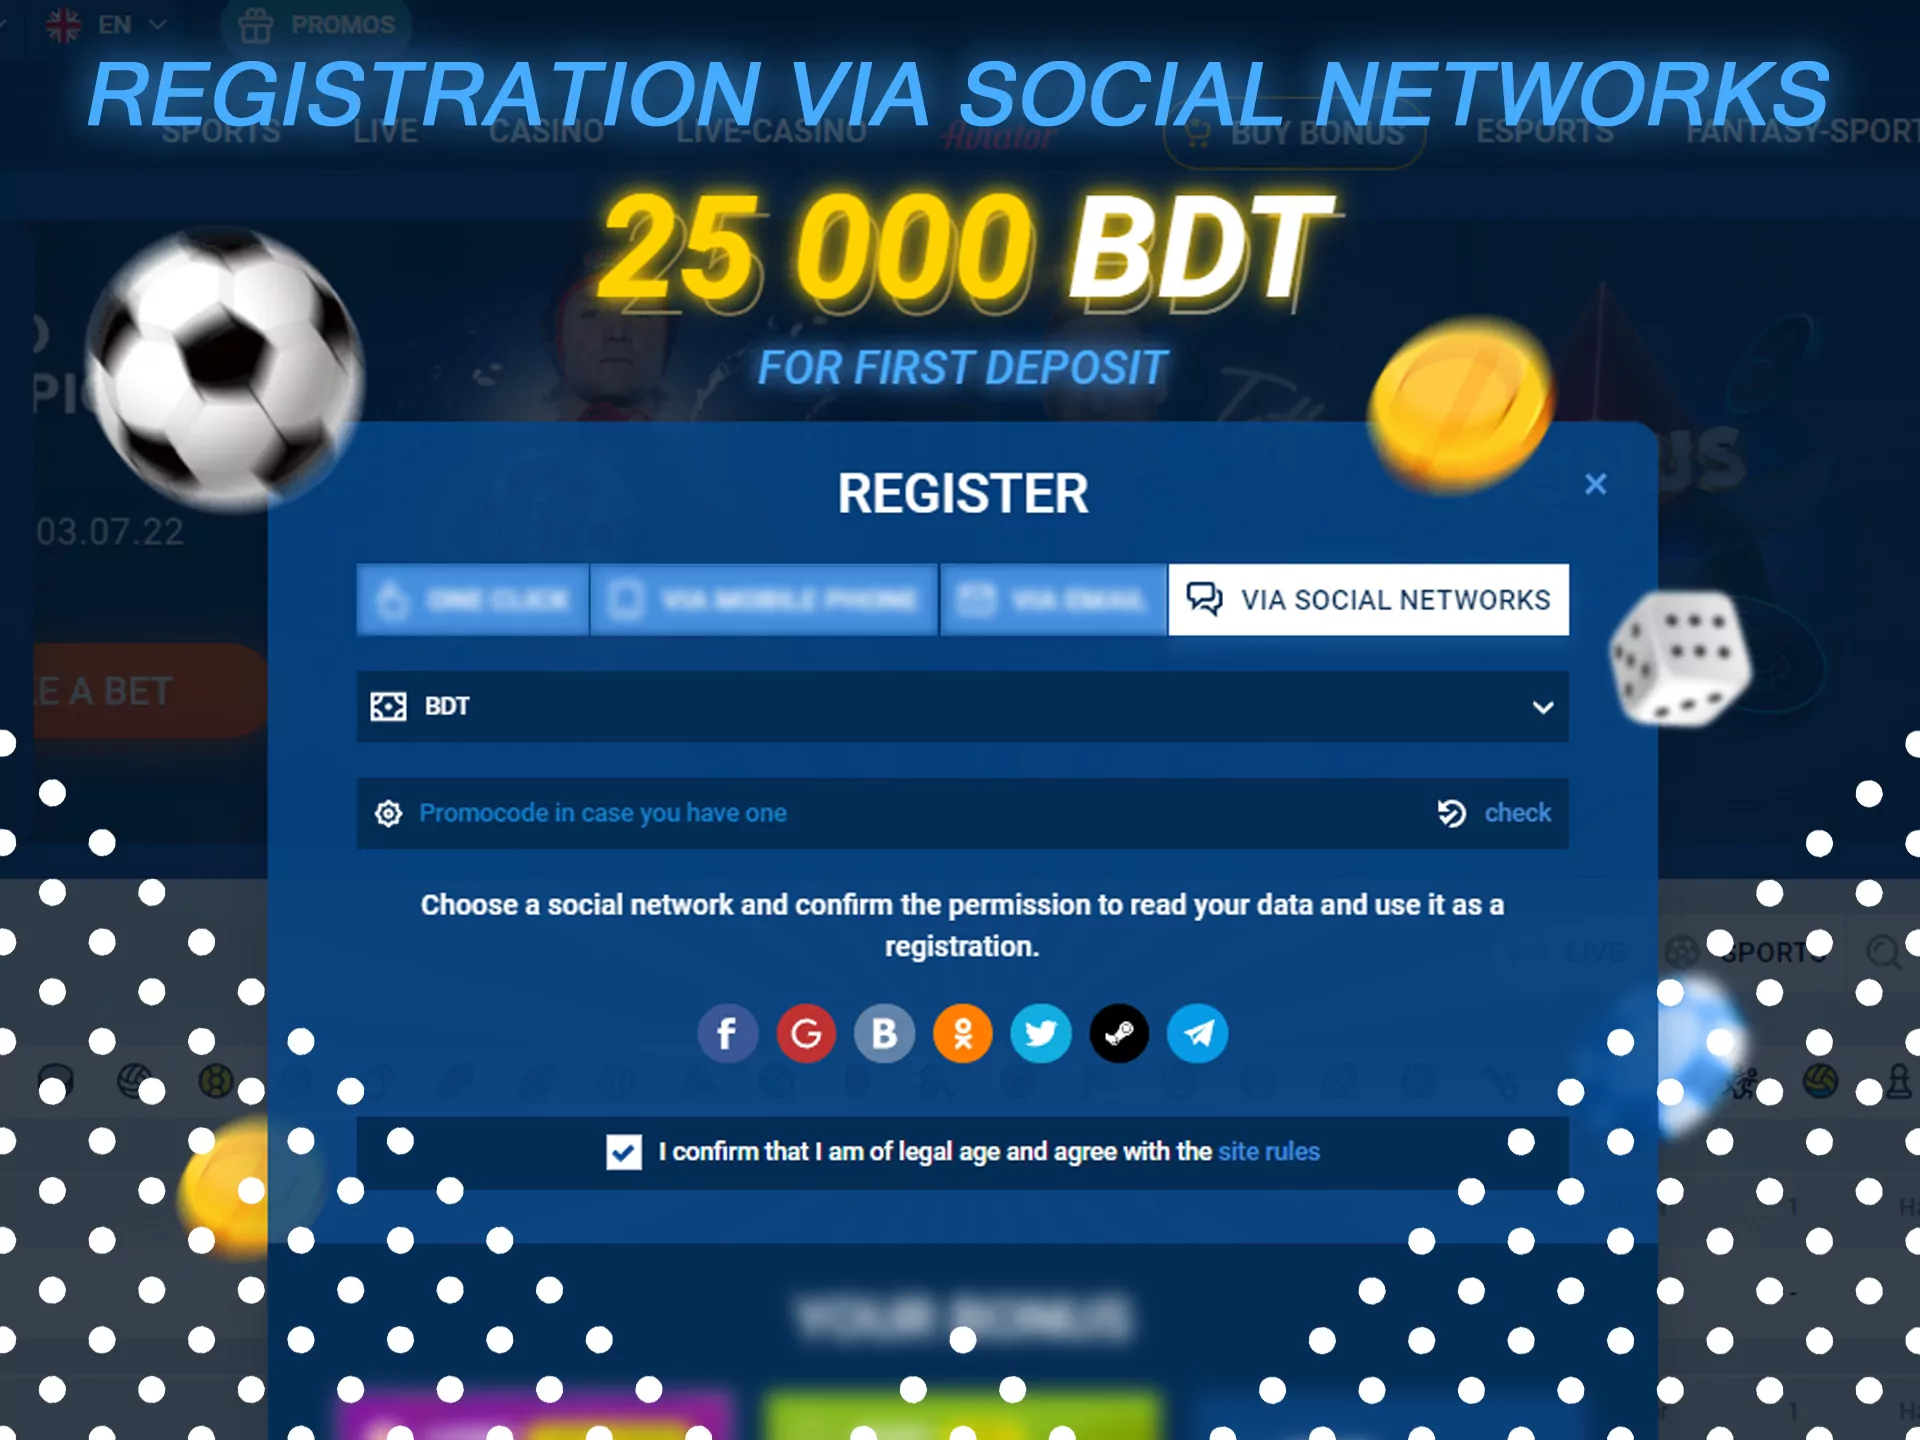 Use your social networks for registrate at Mostbet.